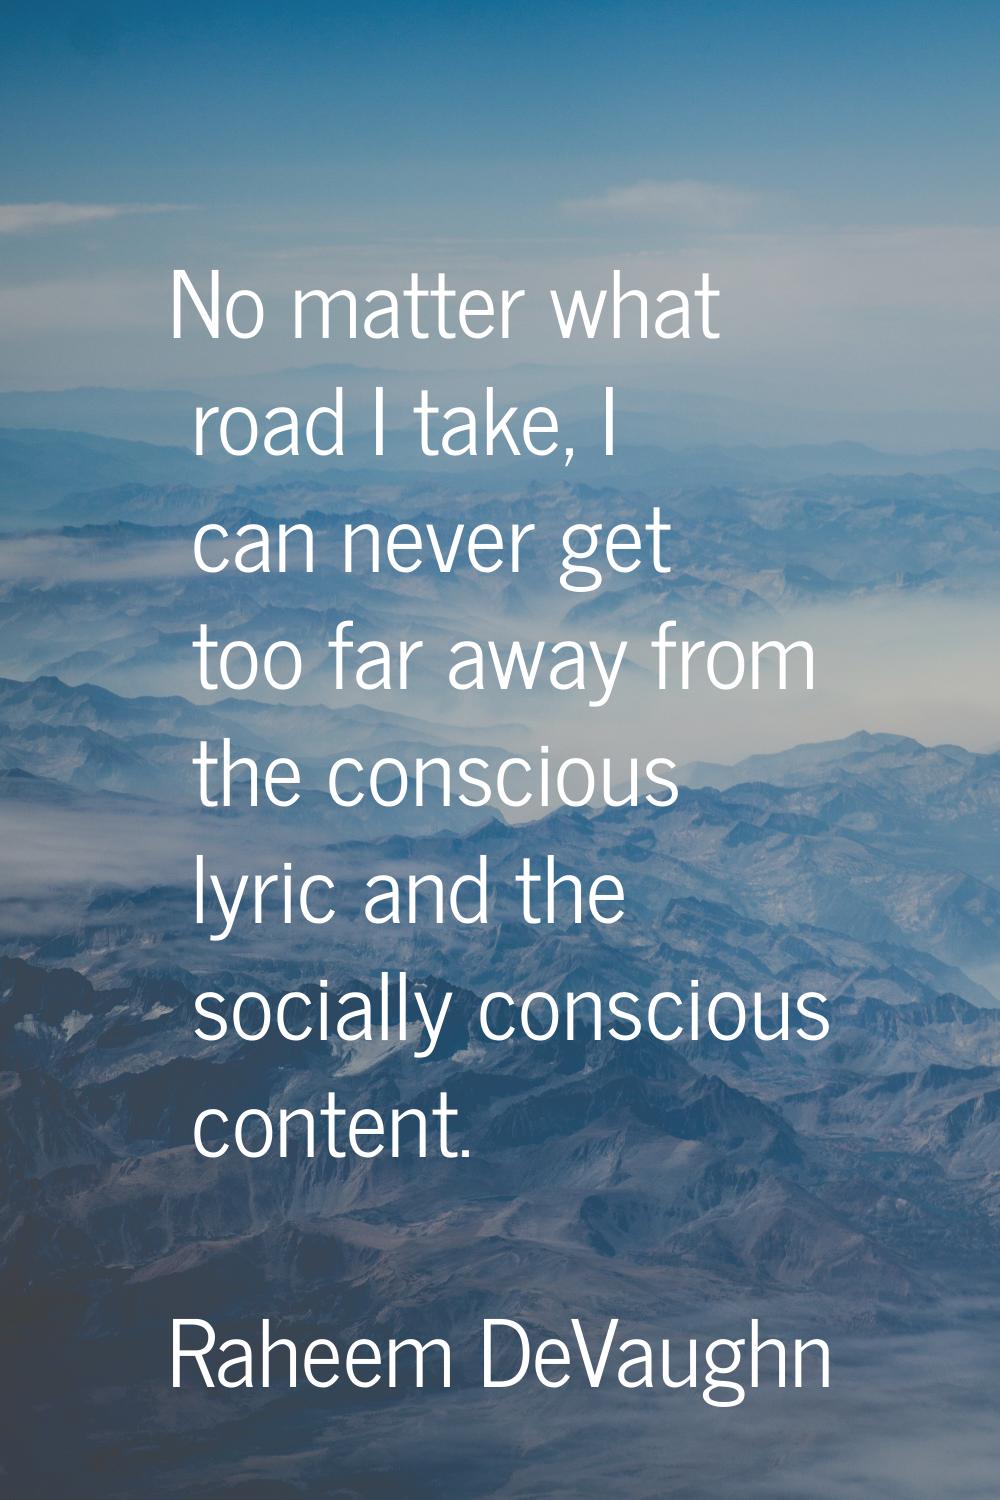 No matter what road I take, I can never get too far away from the conscious lyric and the socially 